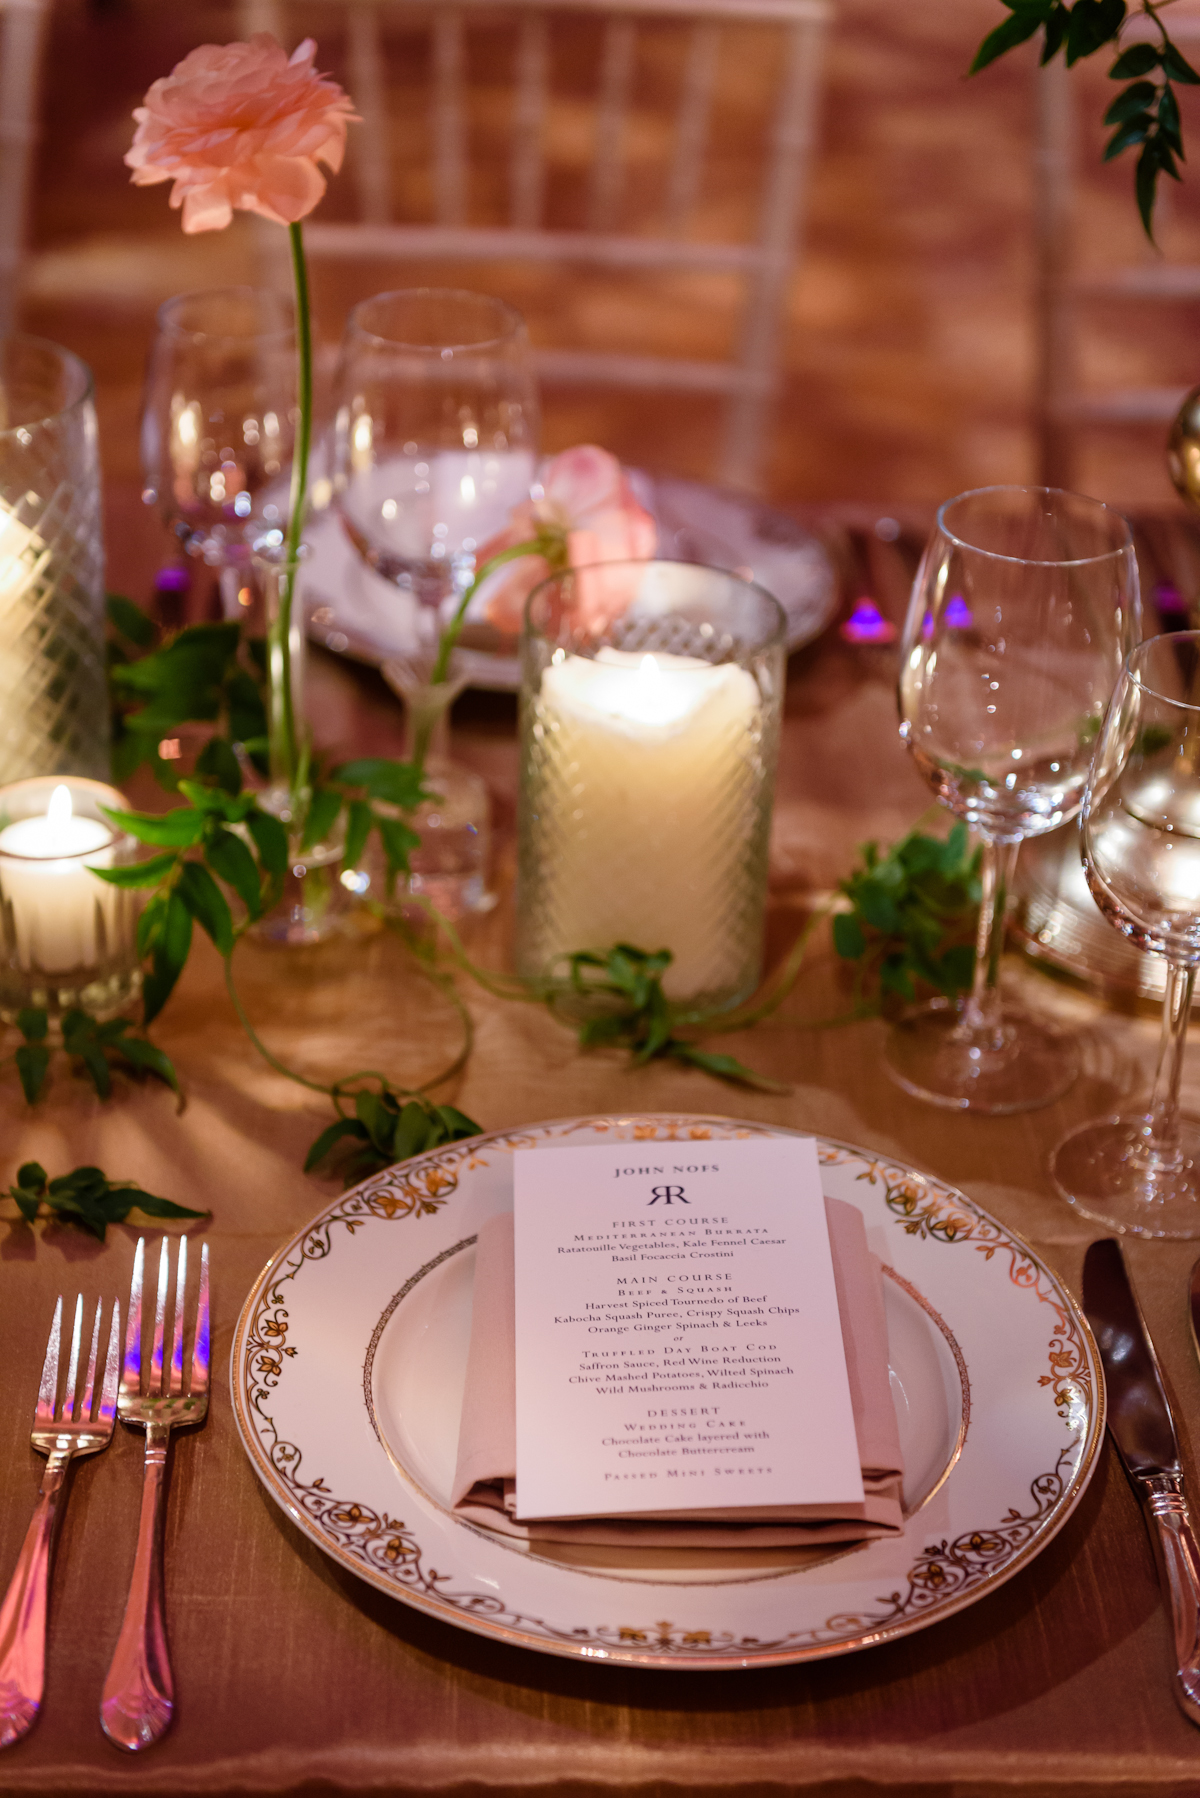 Weylin Wedding: Place setting with gold chargers